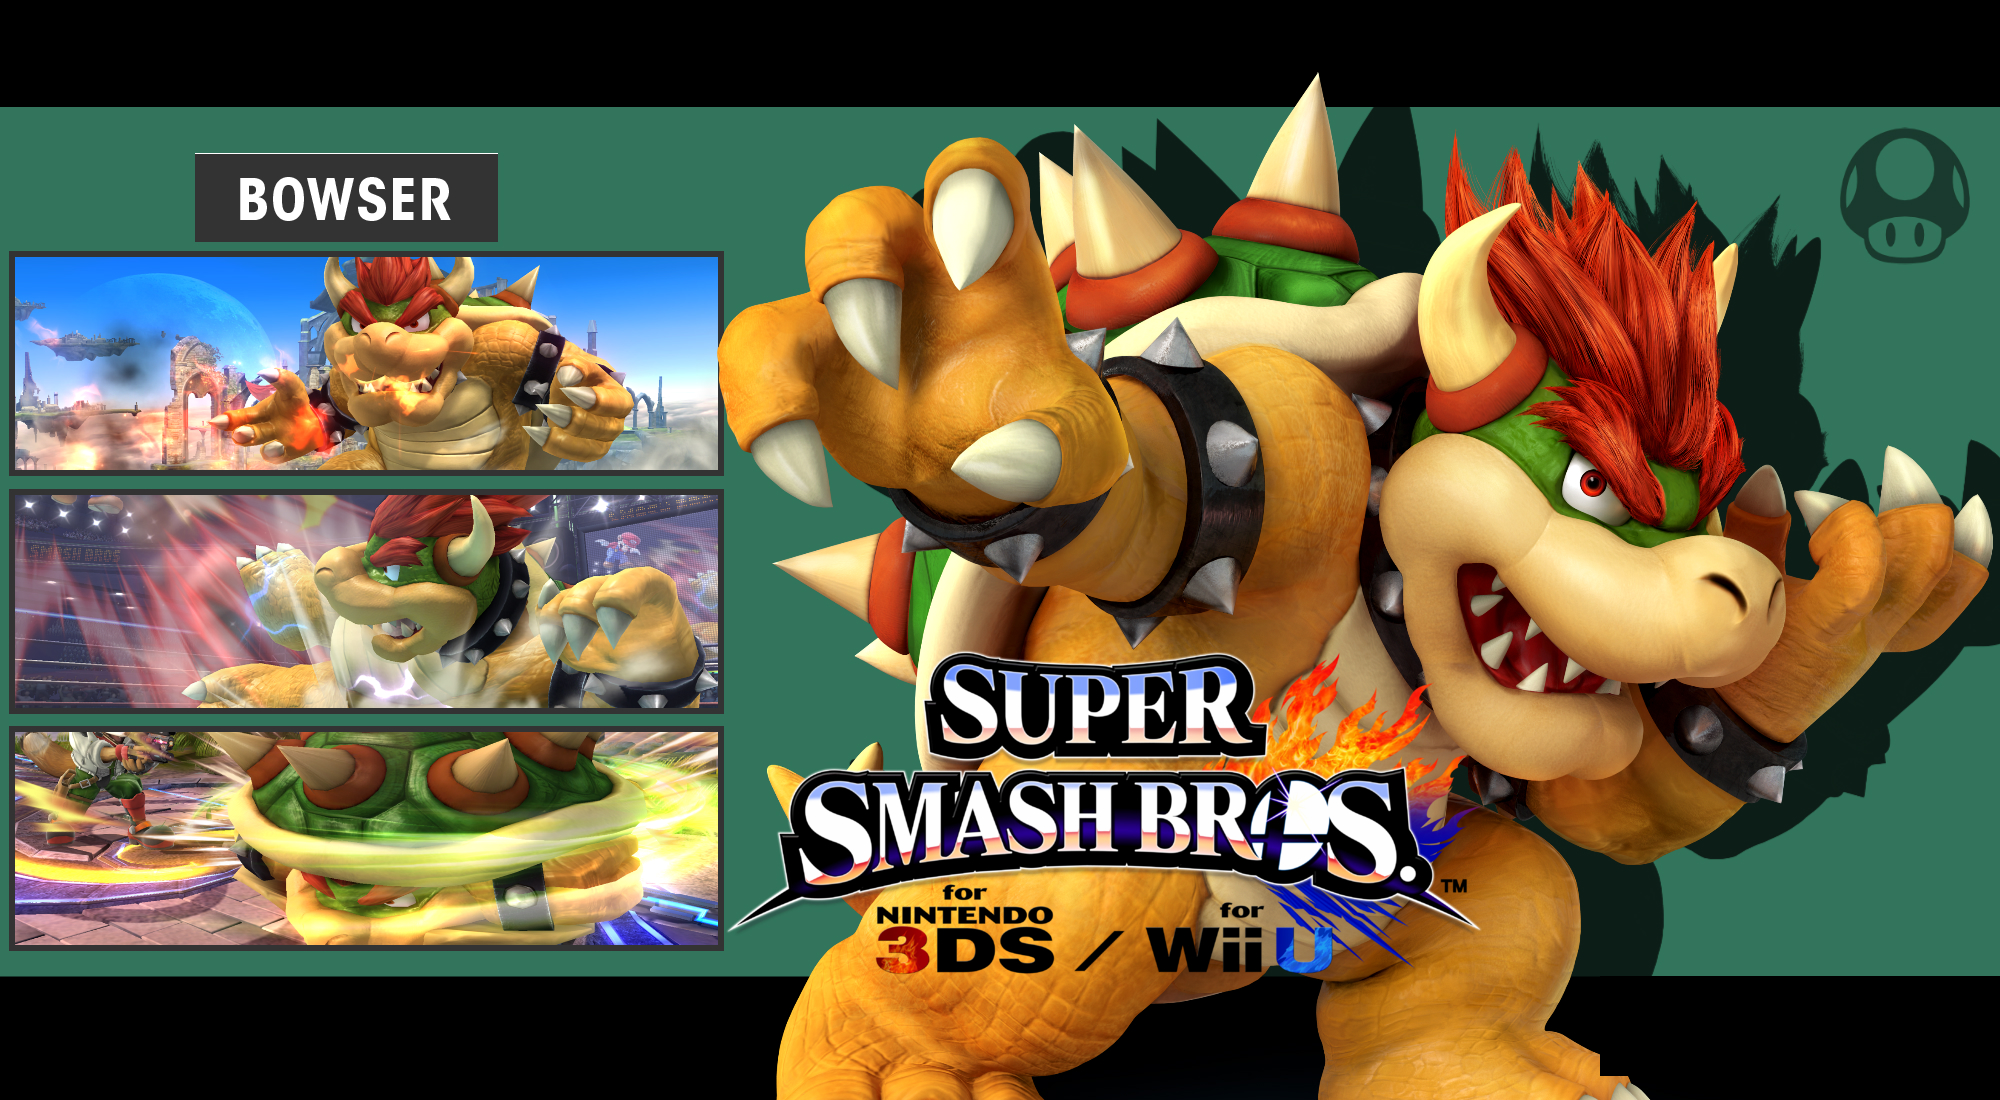 super_smash_bros__3ds_wii_u___bowser_wallpaper_by_dakidgaming-d7xpo5f.jpg